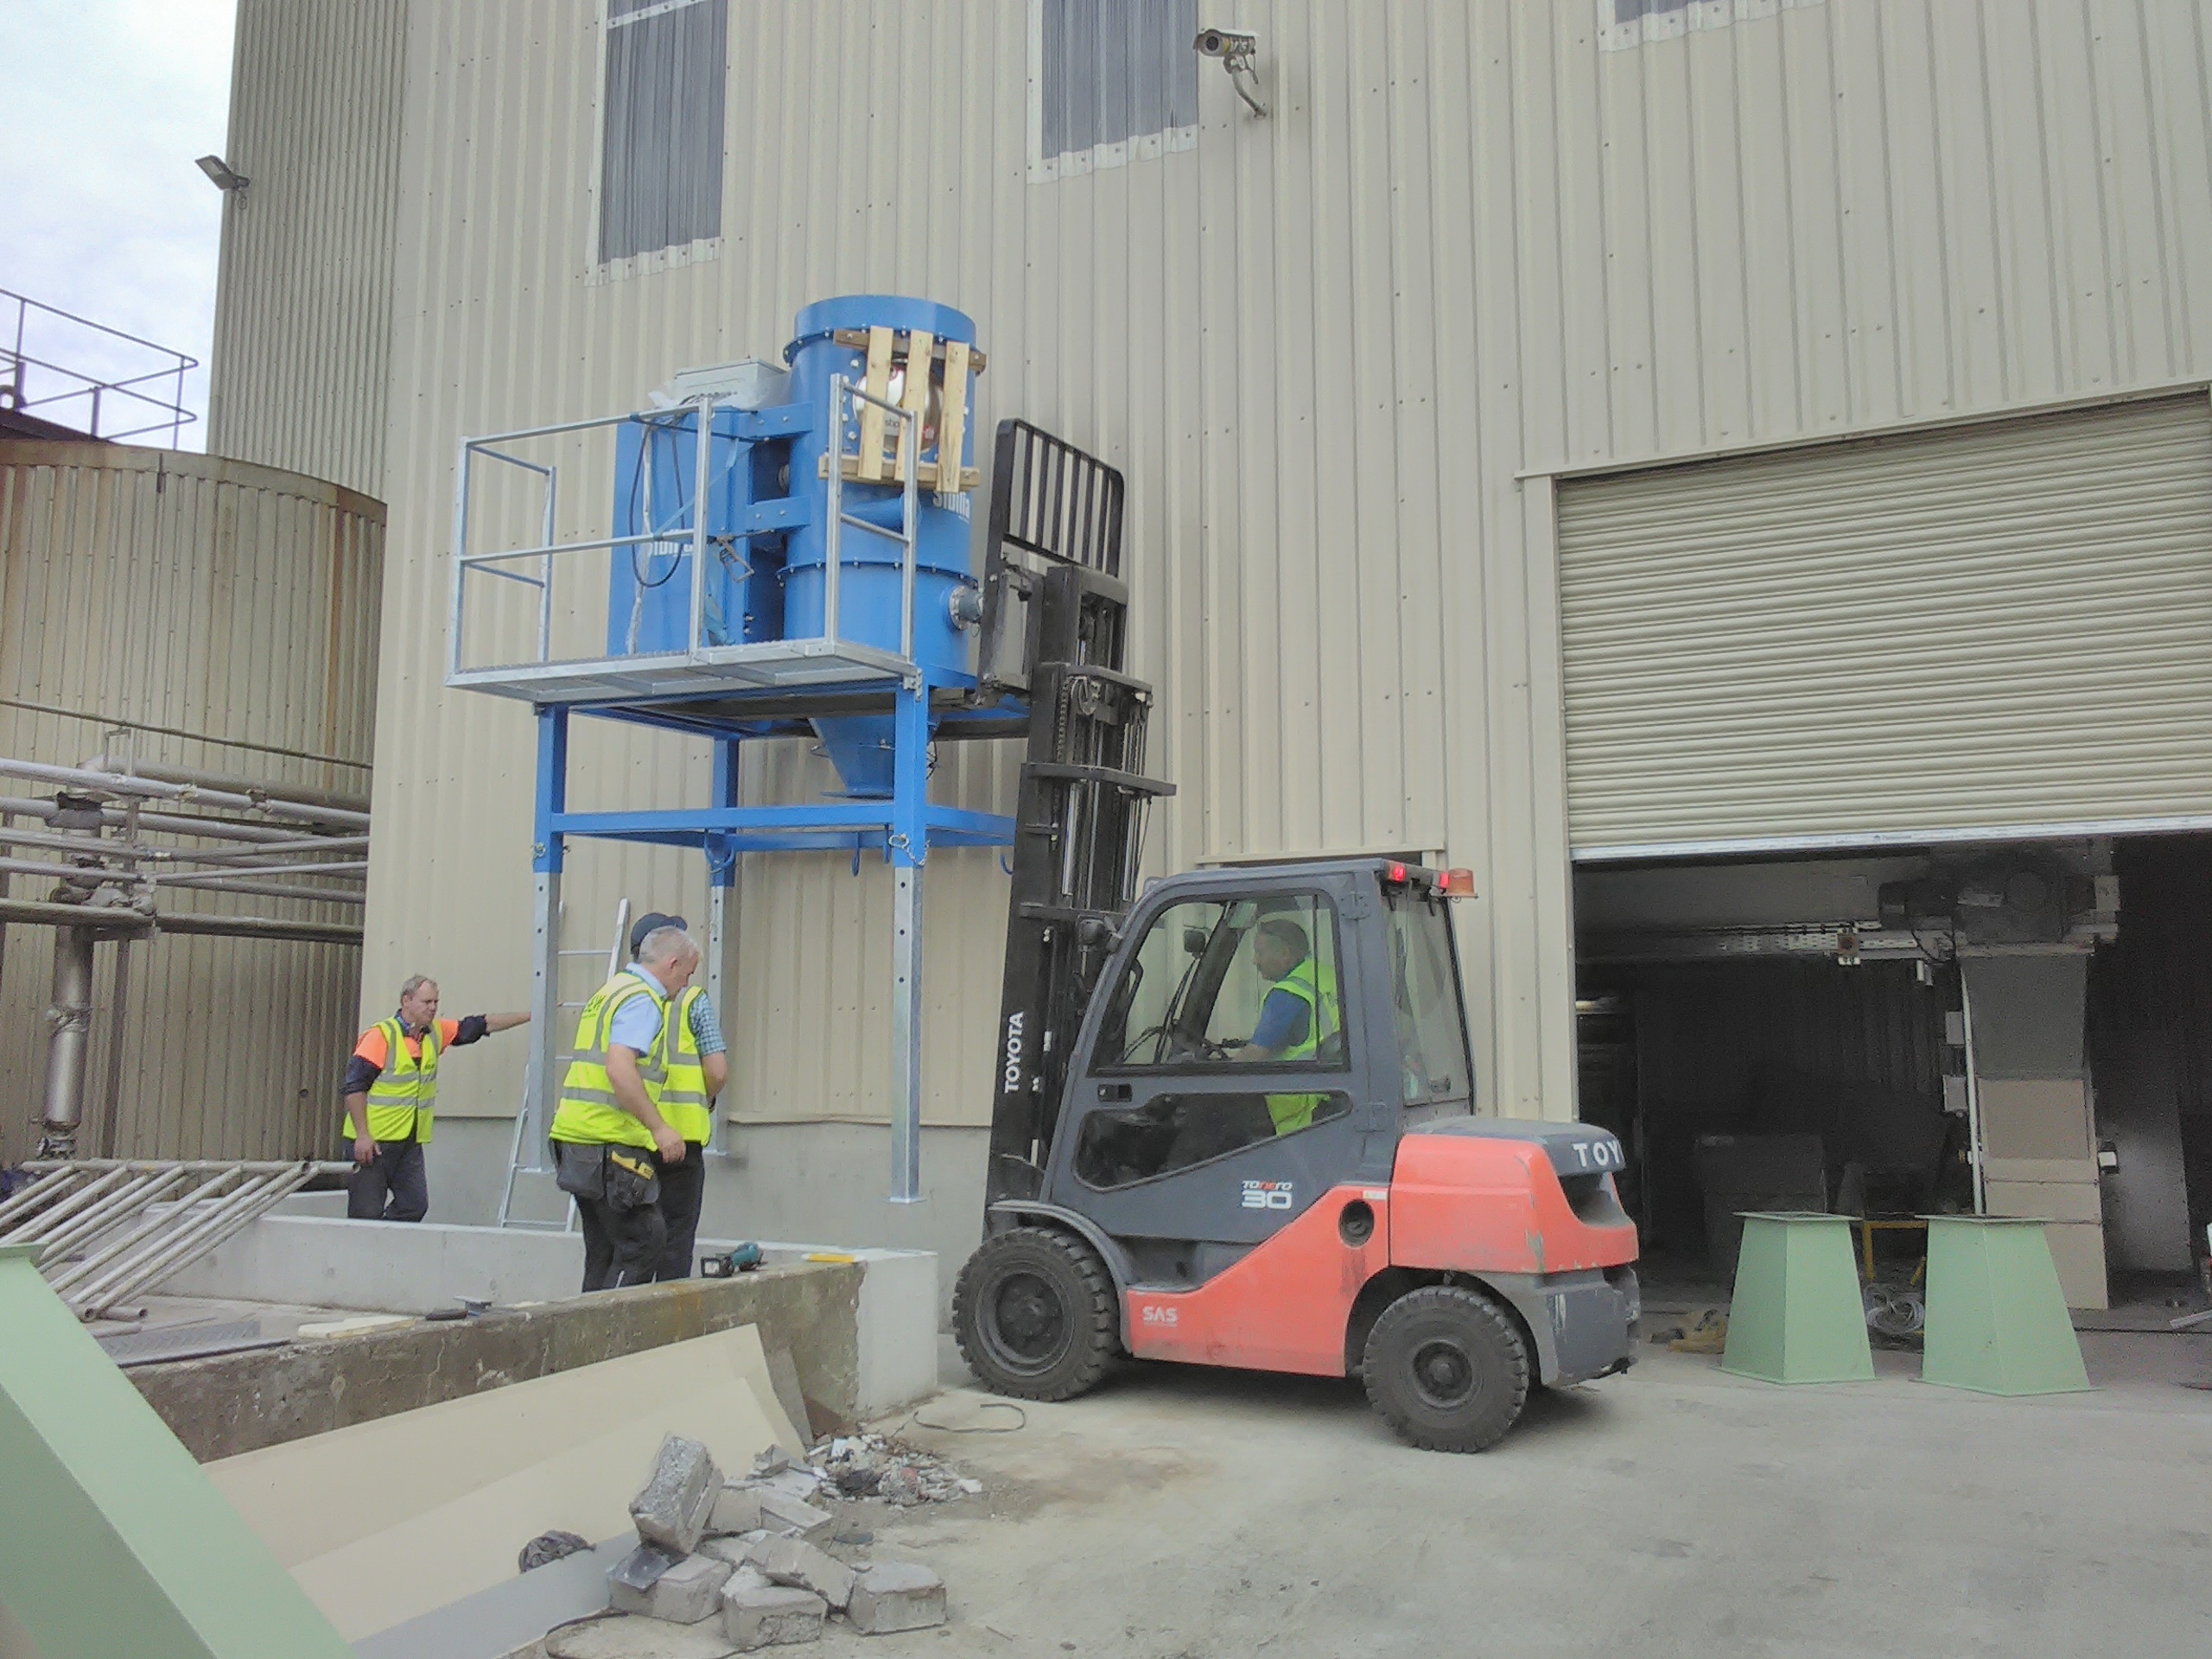 Beam industrial vacuum placed outside factory by forklift